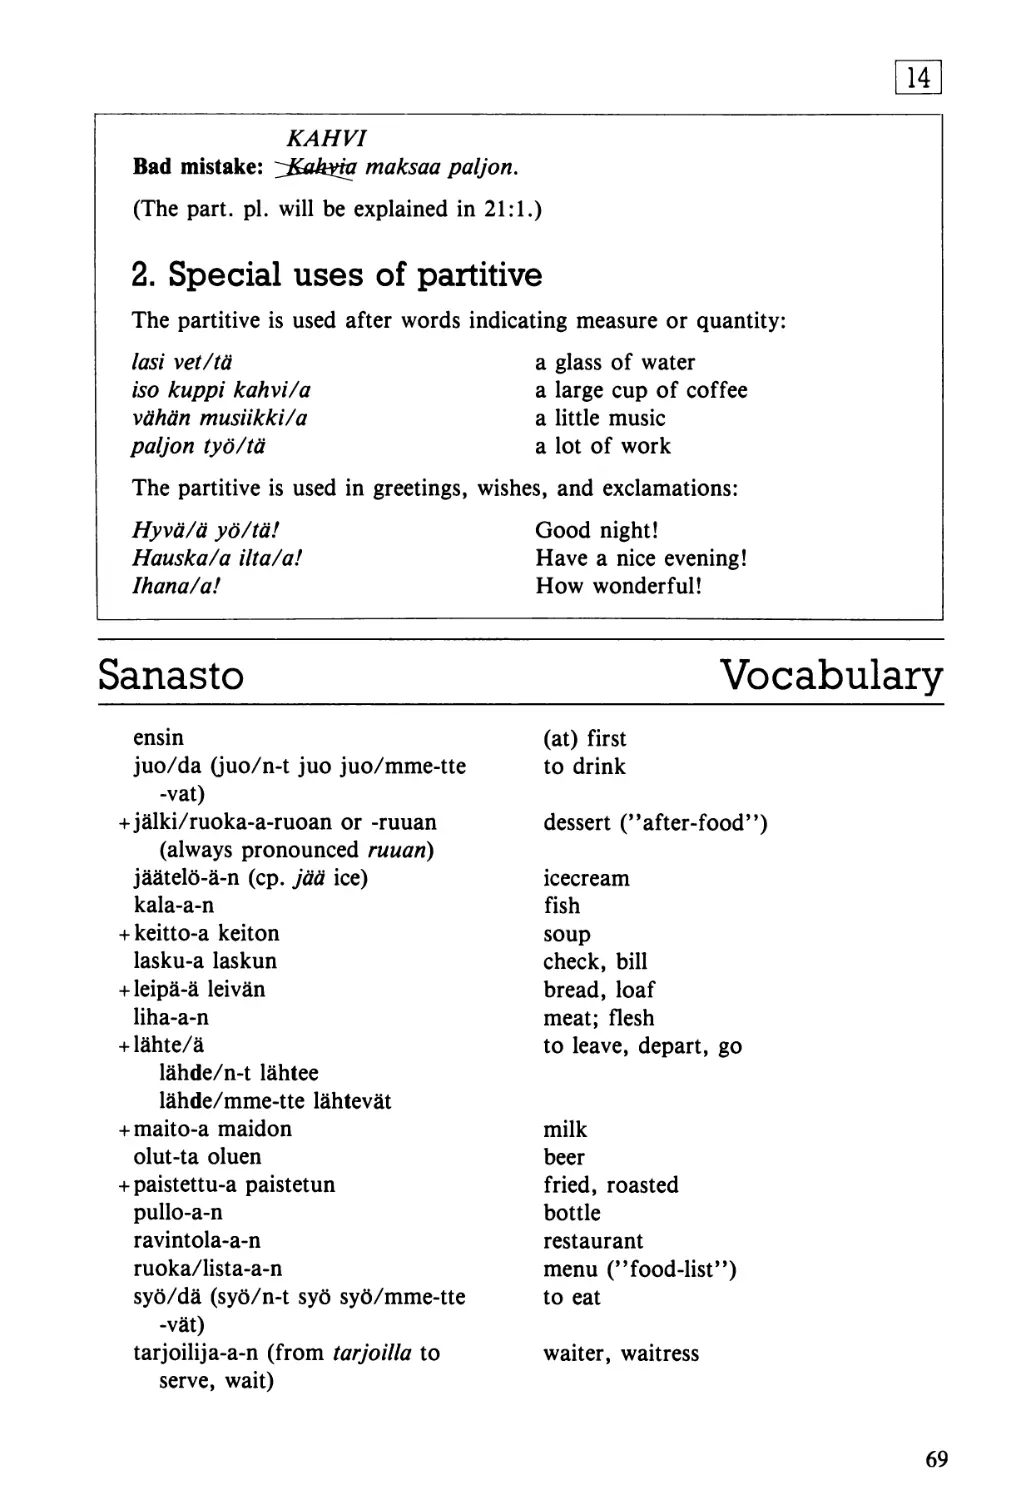 Special uses of partitive